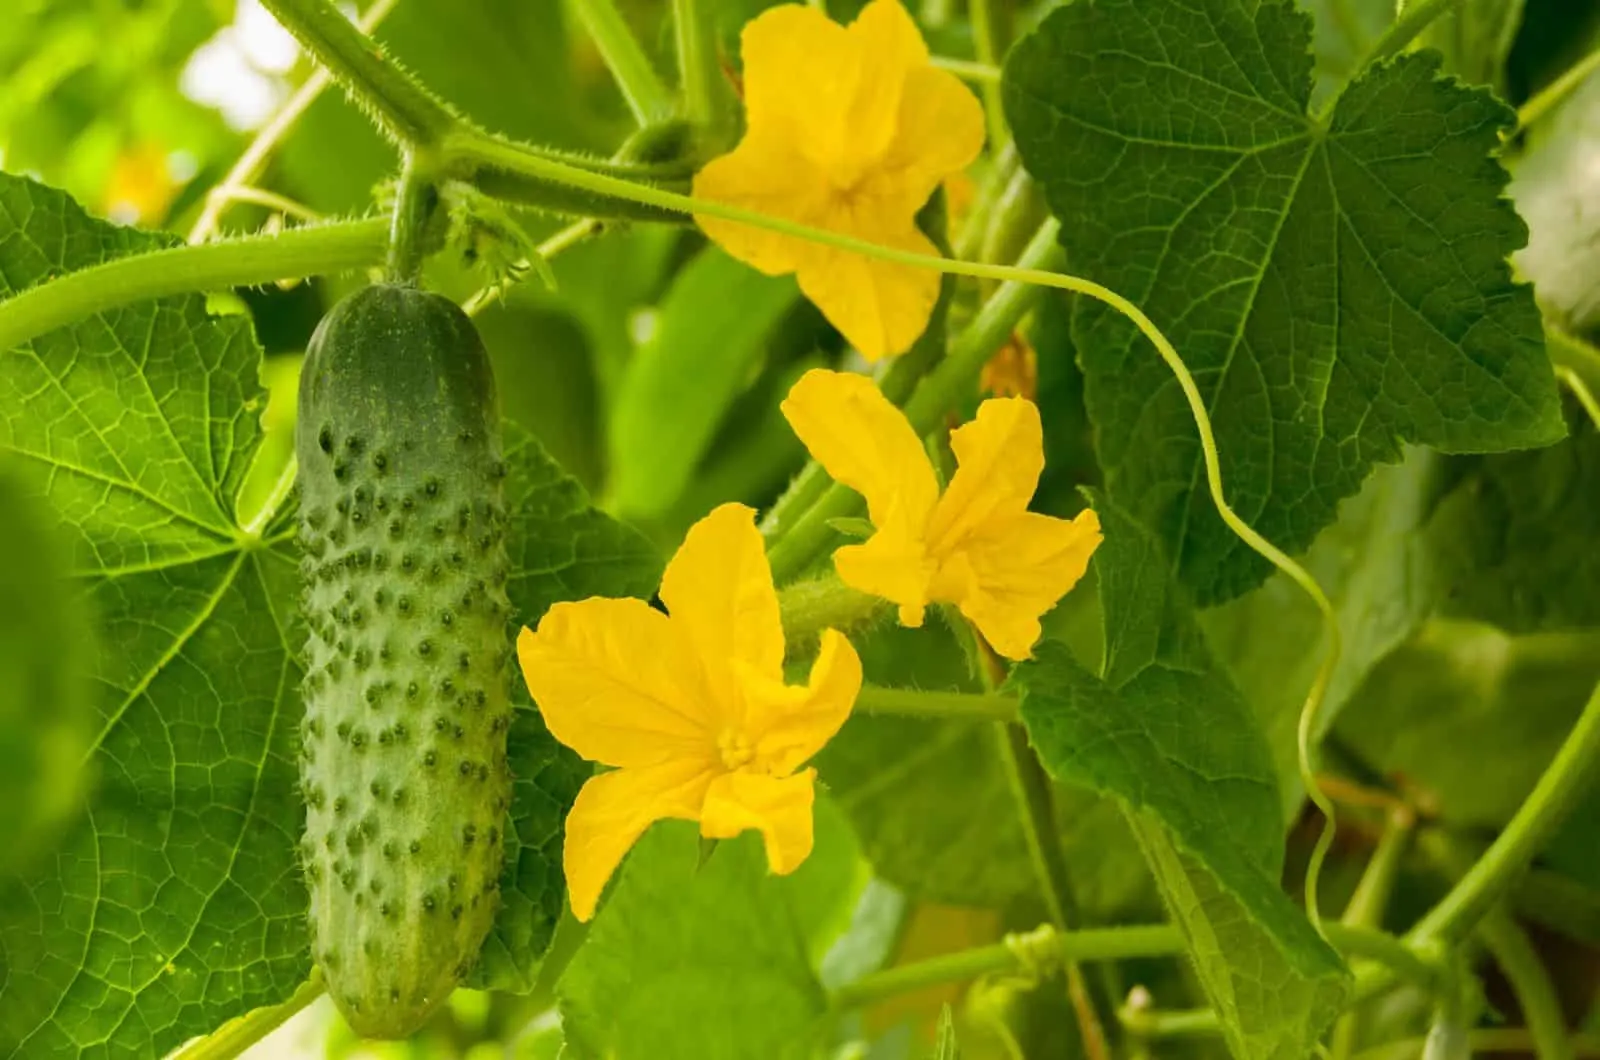 cucumber in a garden with flowers